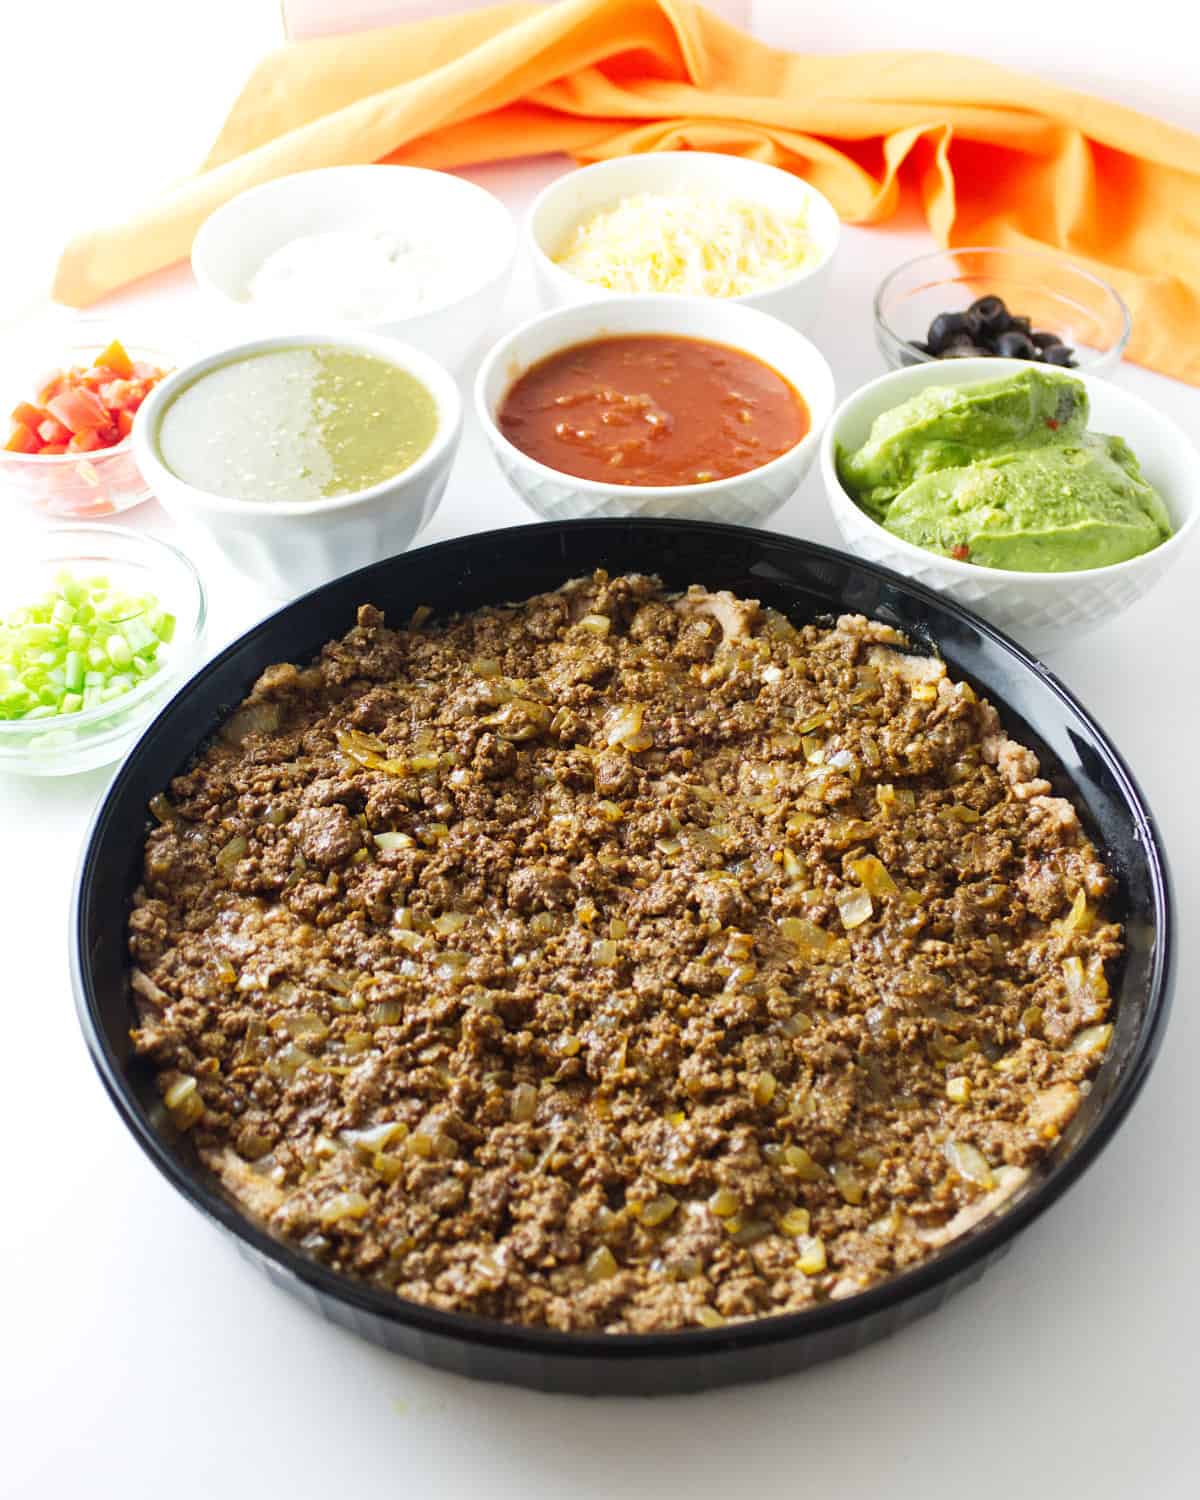 ground beef spread out in a dish.